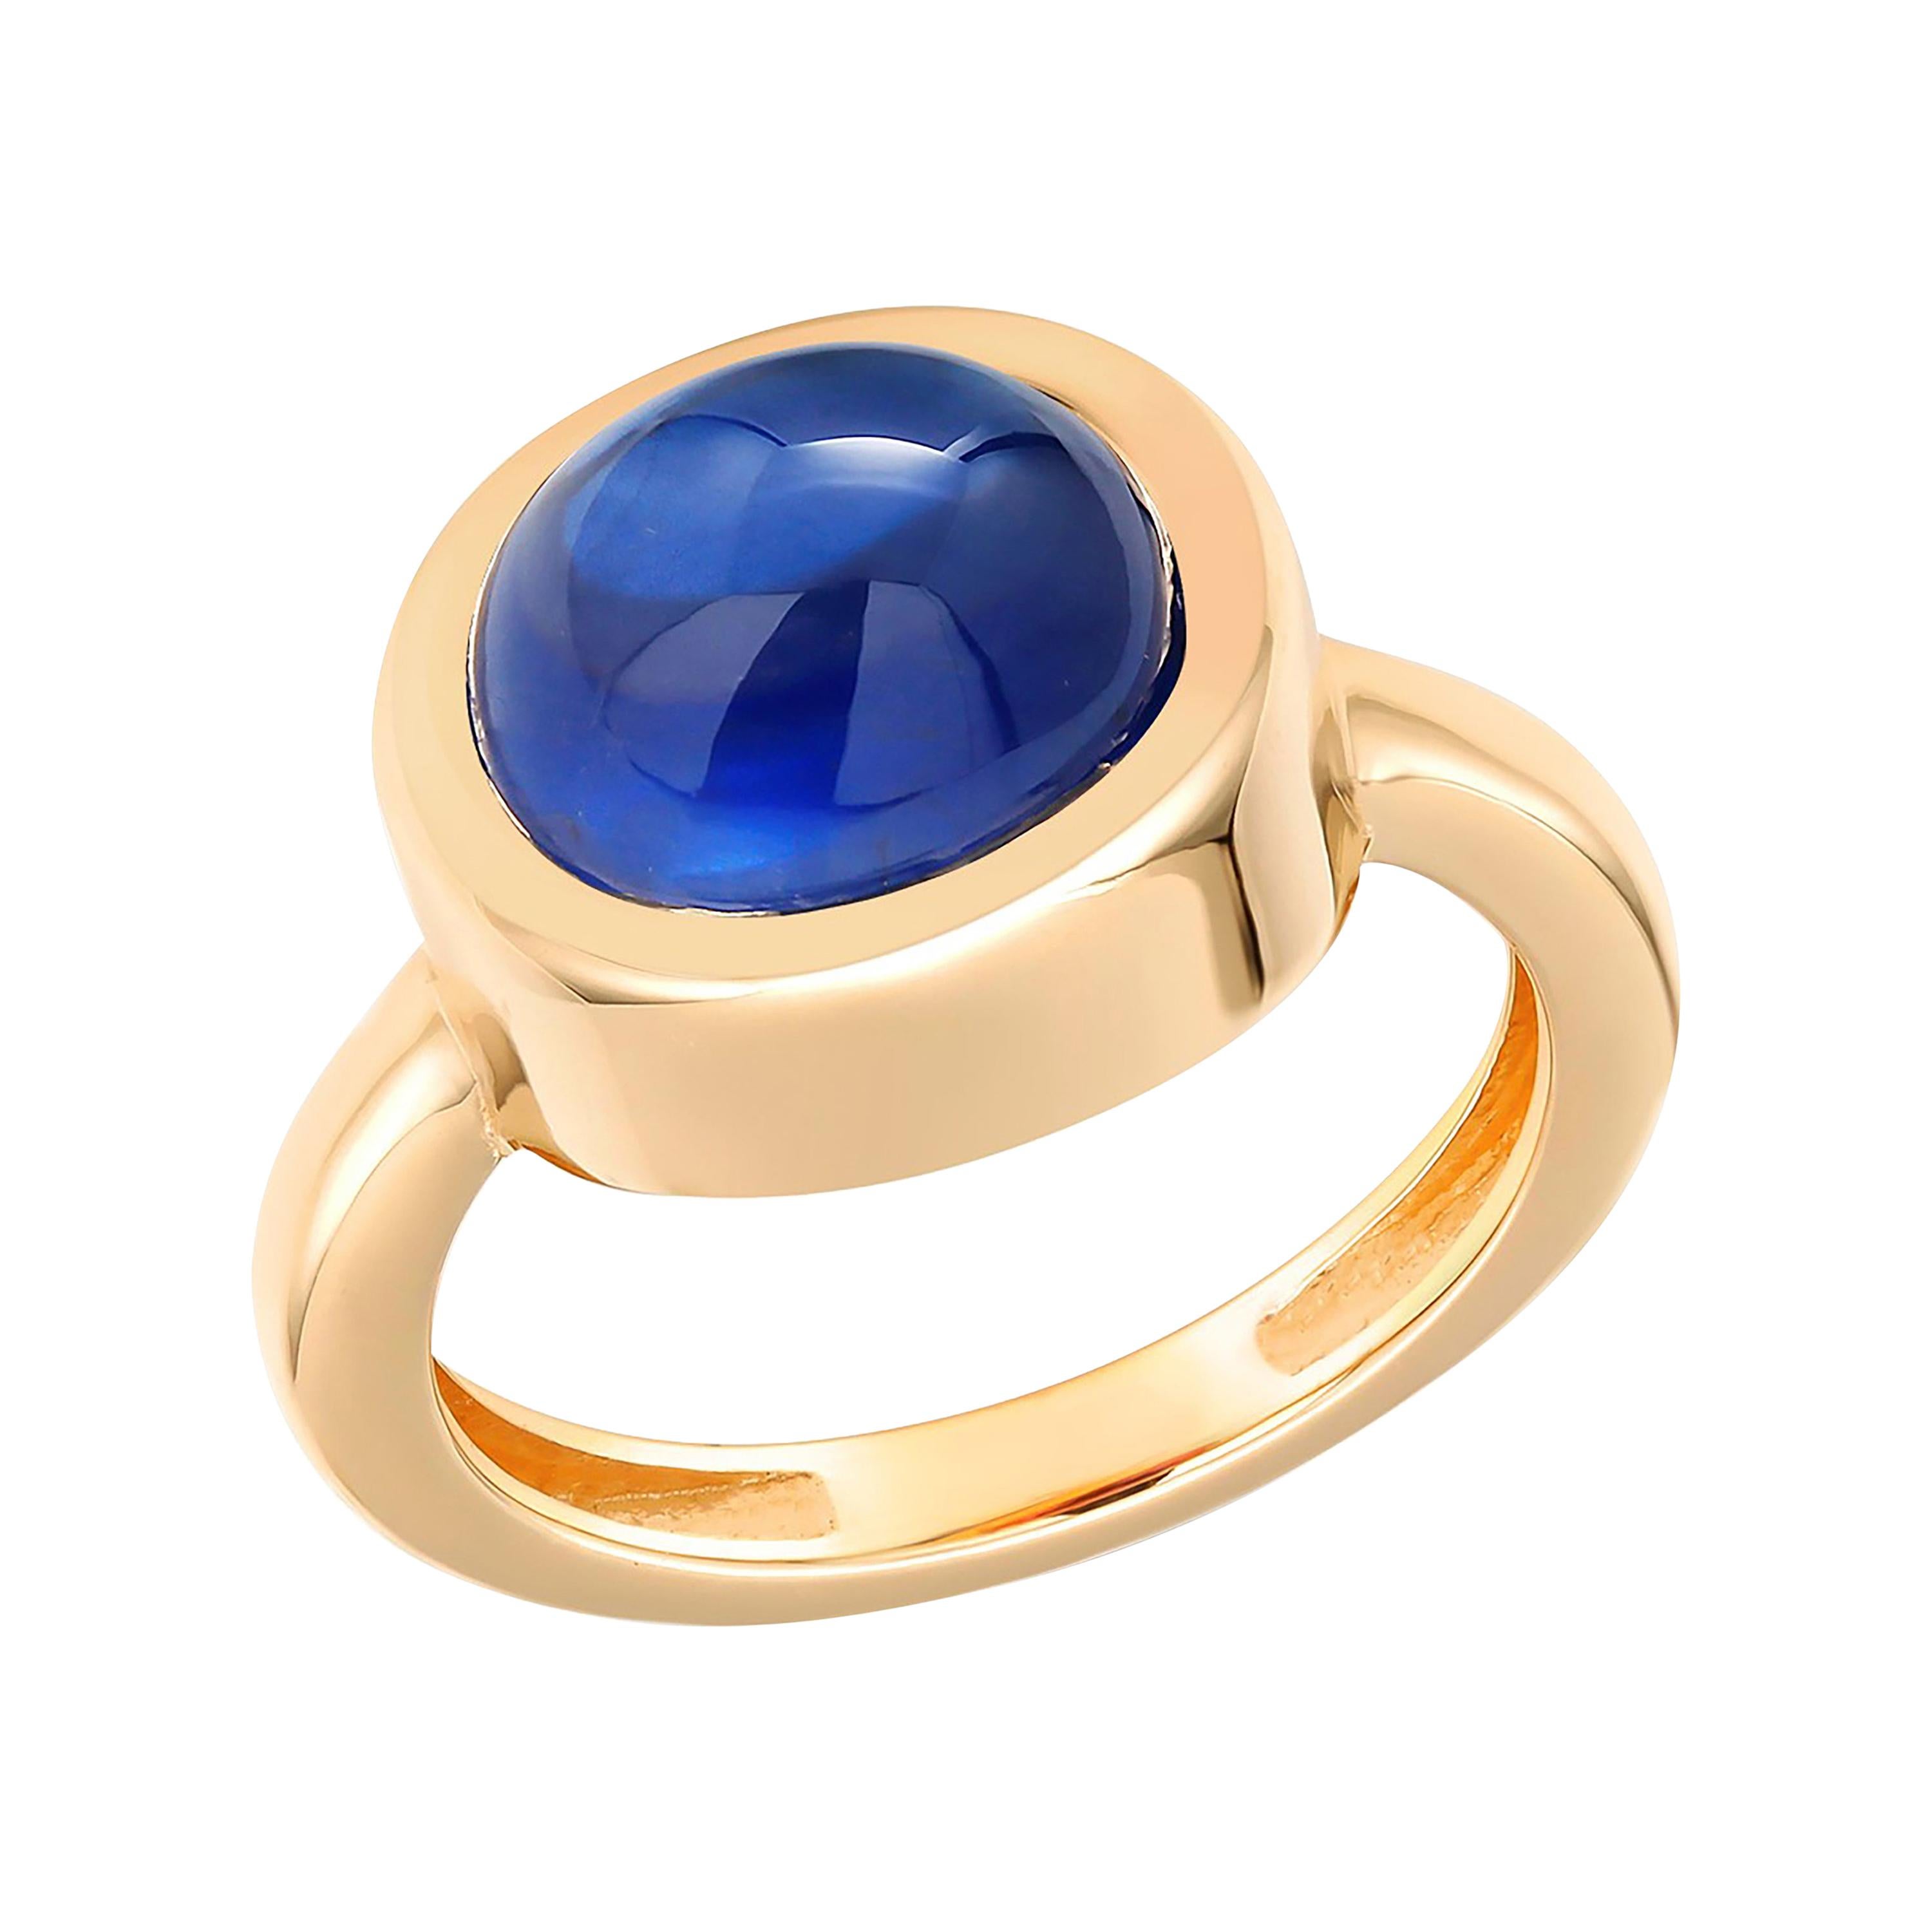 Cabochon Sapphire Raised Dome Yellow Gold Cocktail Ring Weighing 4.40 Carats